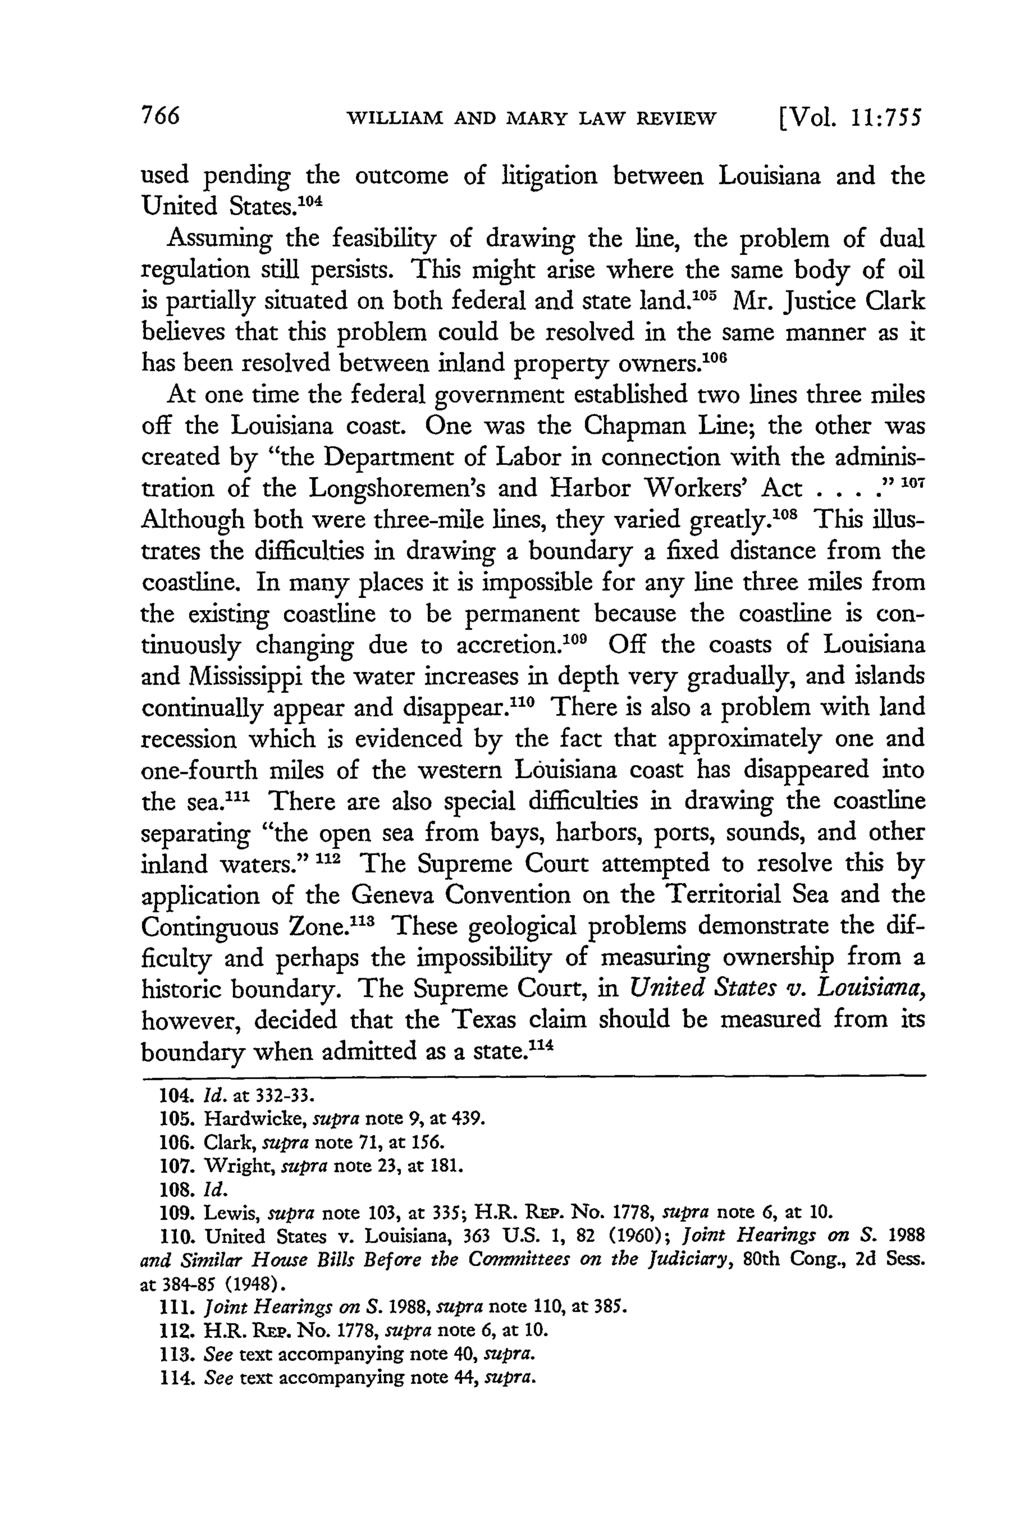 WILLIAM AND MARY LAW REVIEW [Vol. 11:755 used pending the outcome of litigation between Louisiana and the United States.